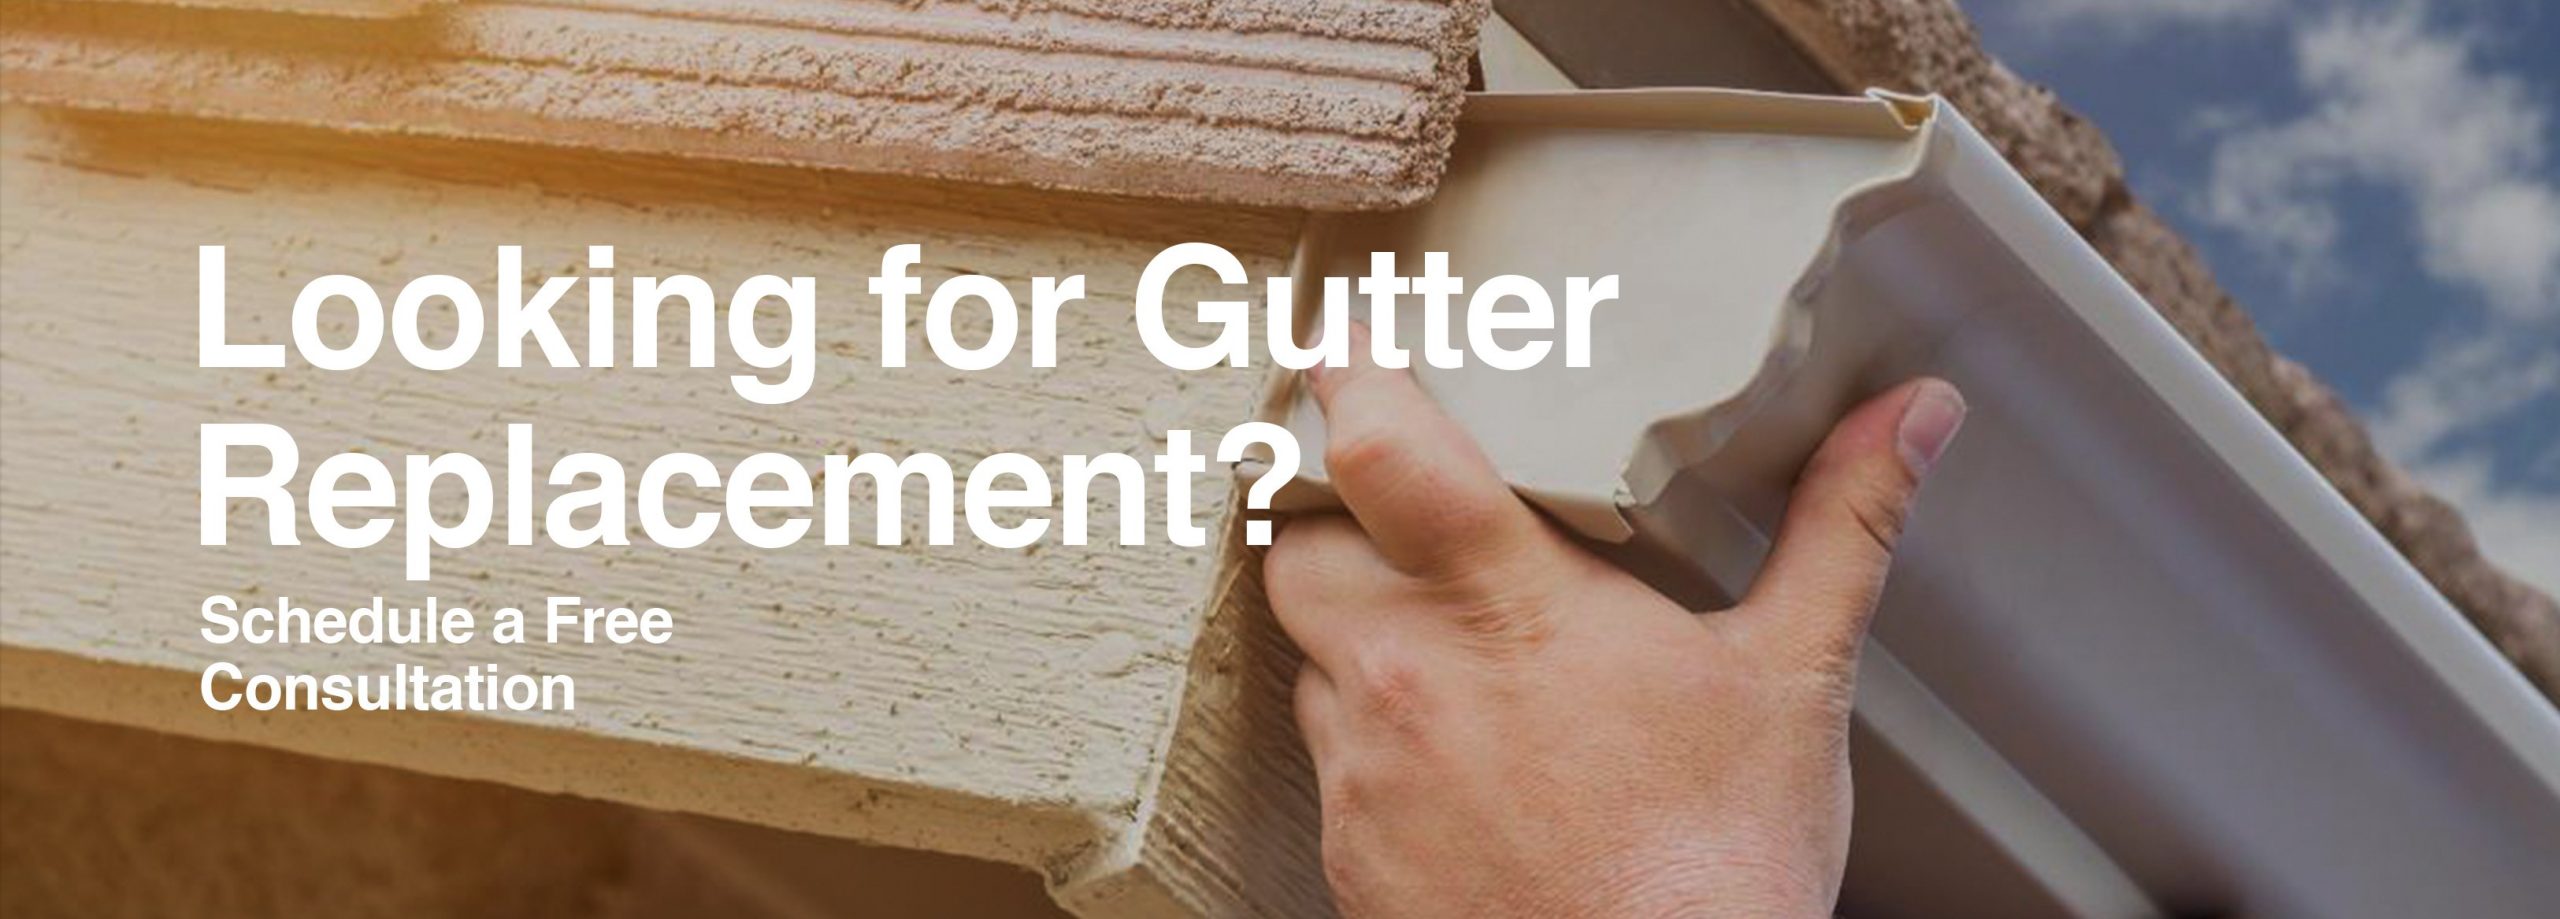 Looking for Gutter Replacement?